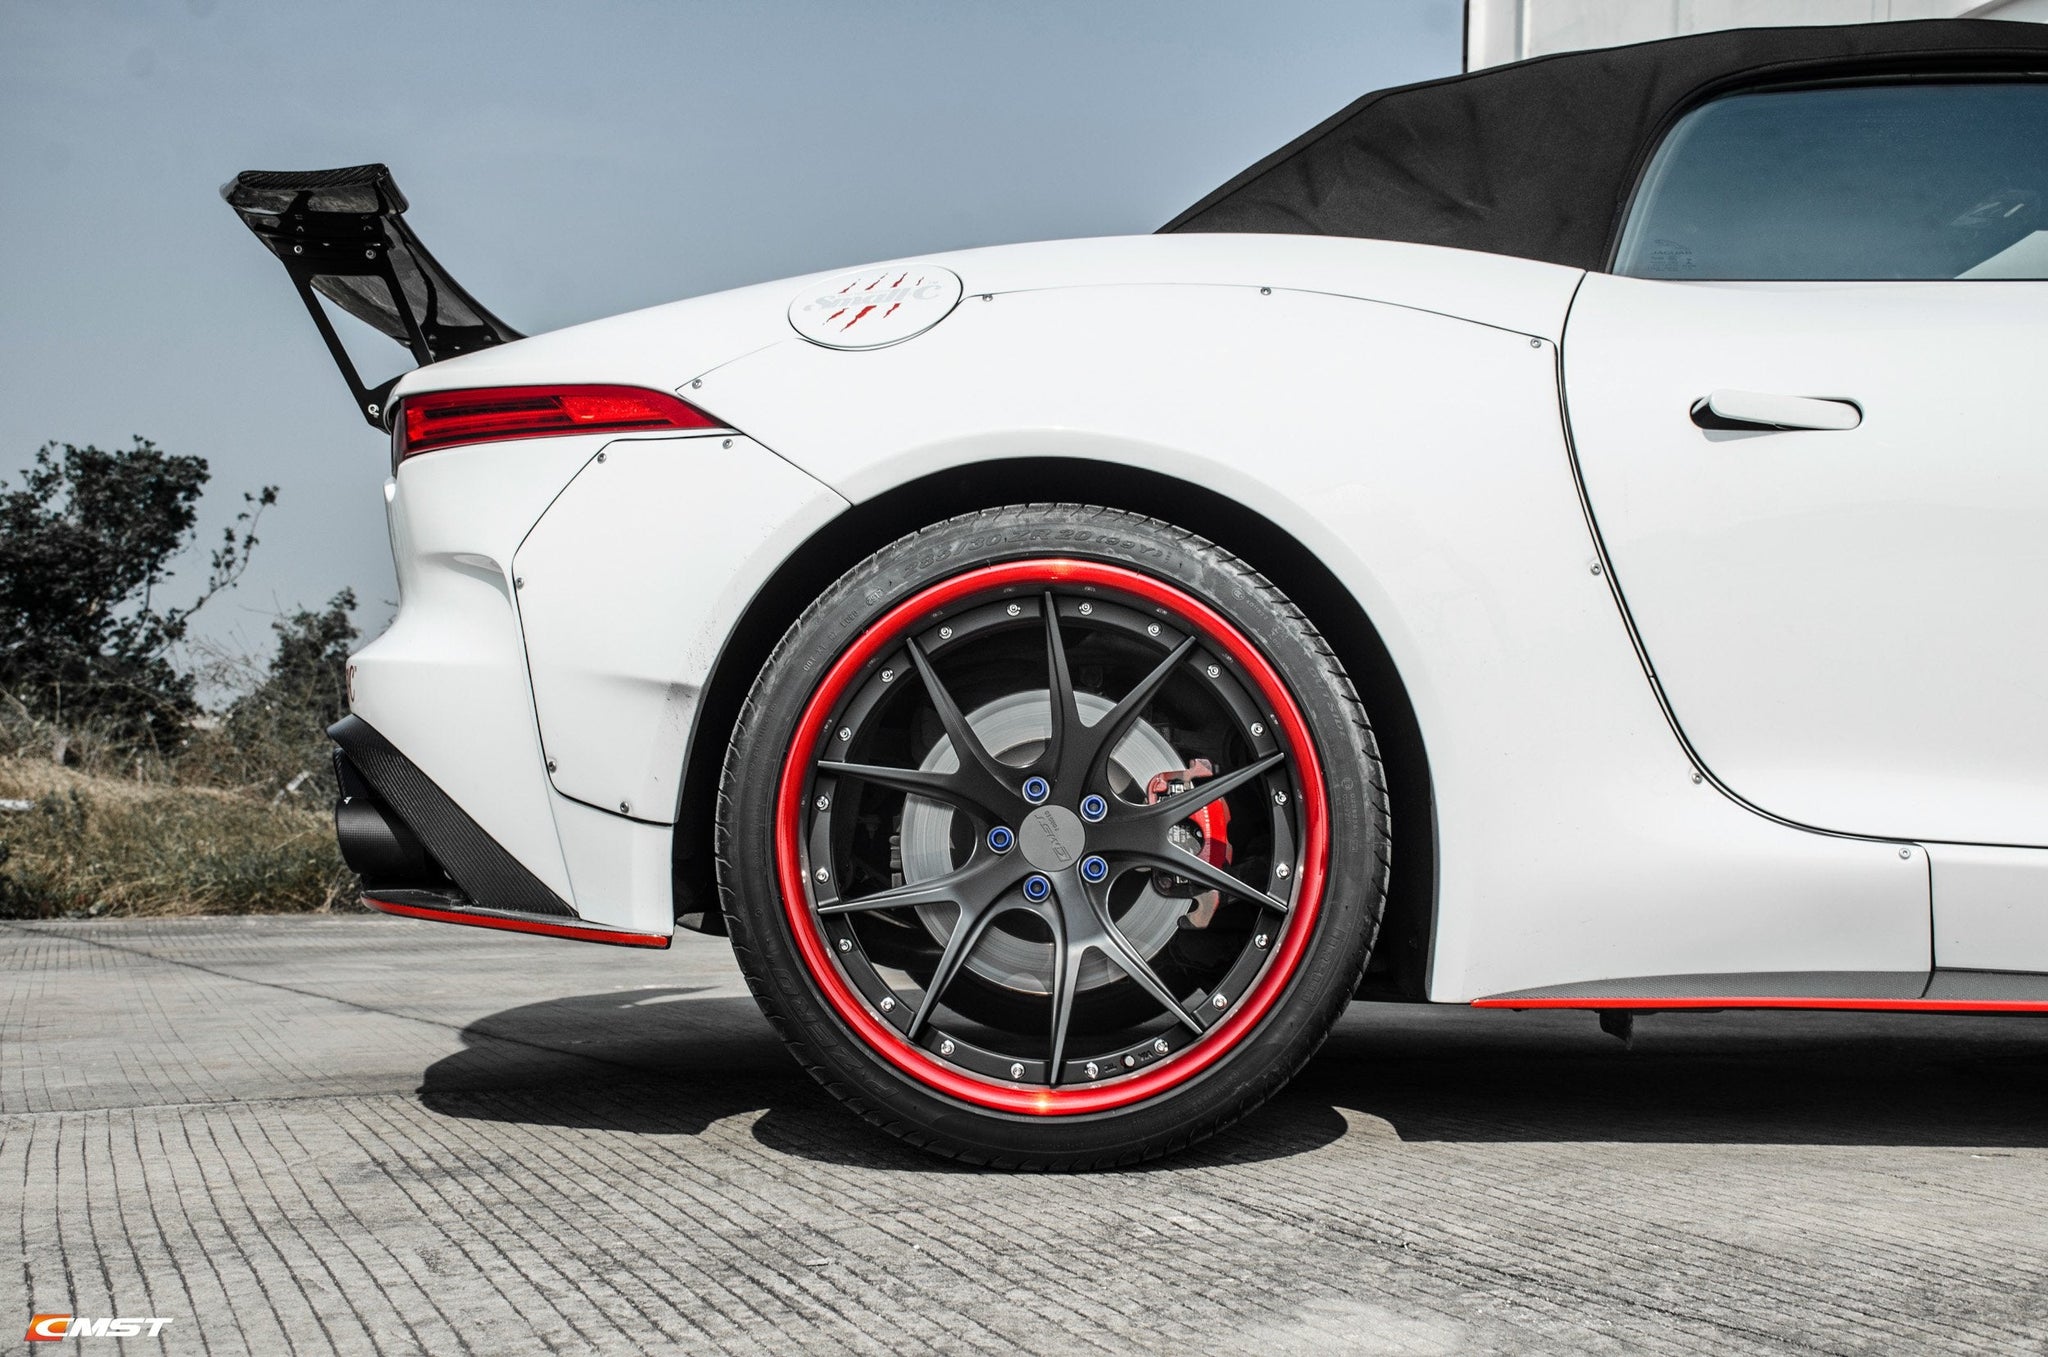 Check our price and buy CMST Carbon Fiber WideBody Kit set for Jaguar F-Type!